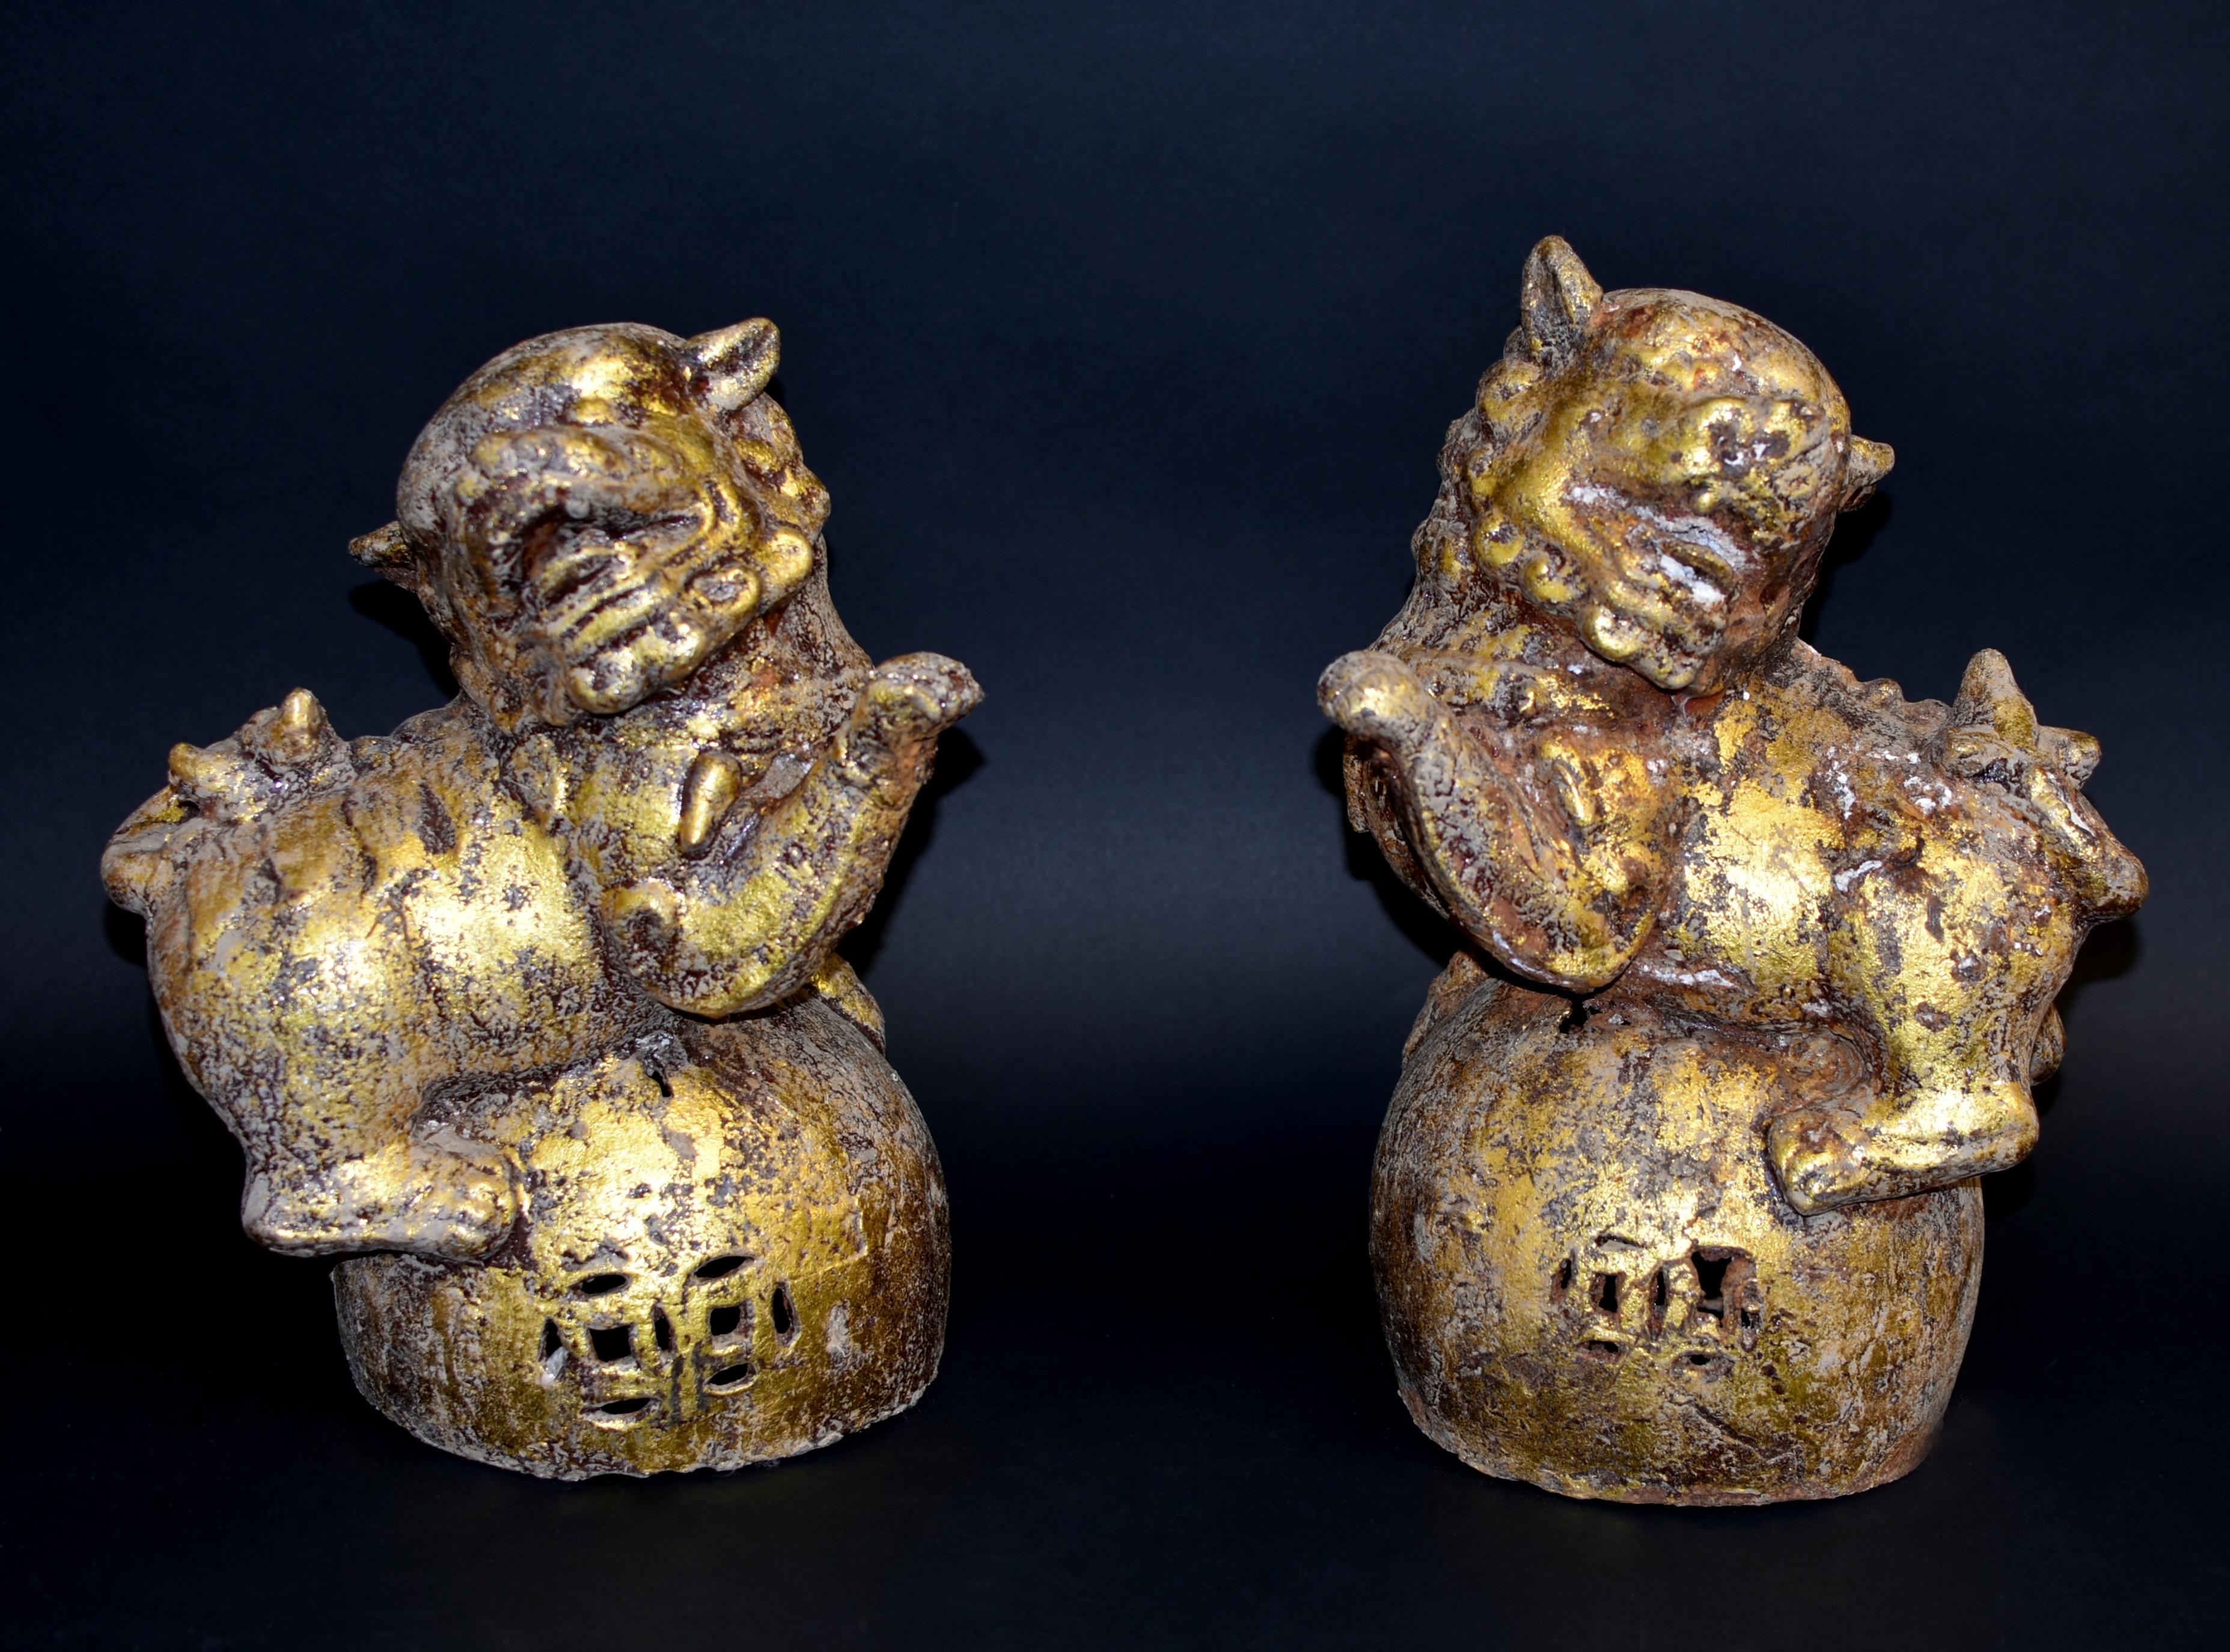 A pair of gilded iron foo dogs weighing a whopping 40 lb. Each well-fashioned in a perched position, the large head tilted with open jaws, large eyes and framed by a tightly curled mane. One of the paws raised and suspended in the air in a playful